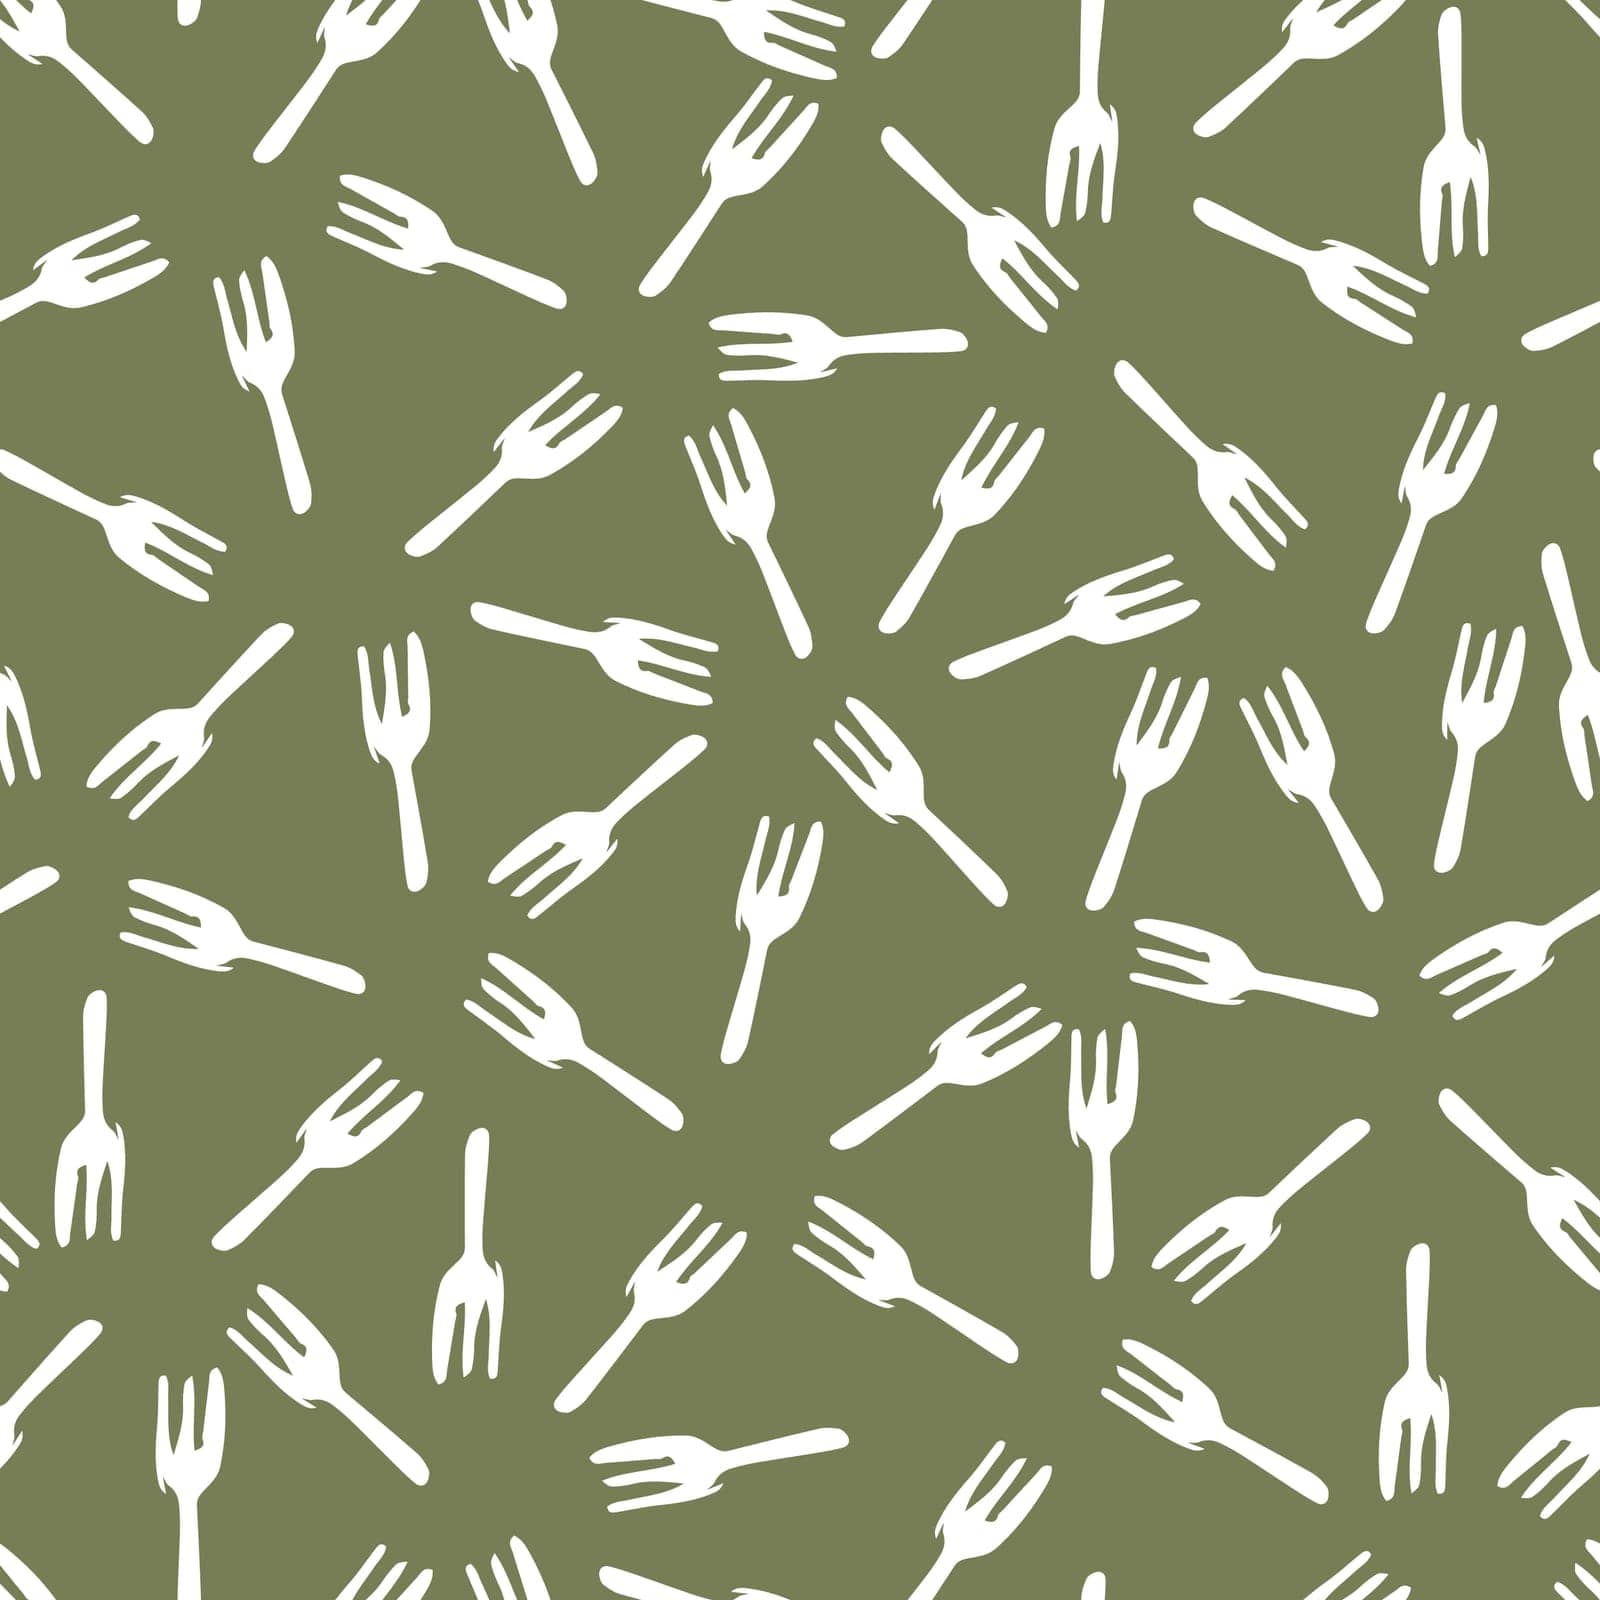 Vector green forks simple monochrome repeat pattern. Perfect for fabric, scrapbooking and wallpaper projects. Surface pattern design.